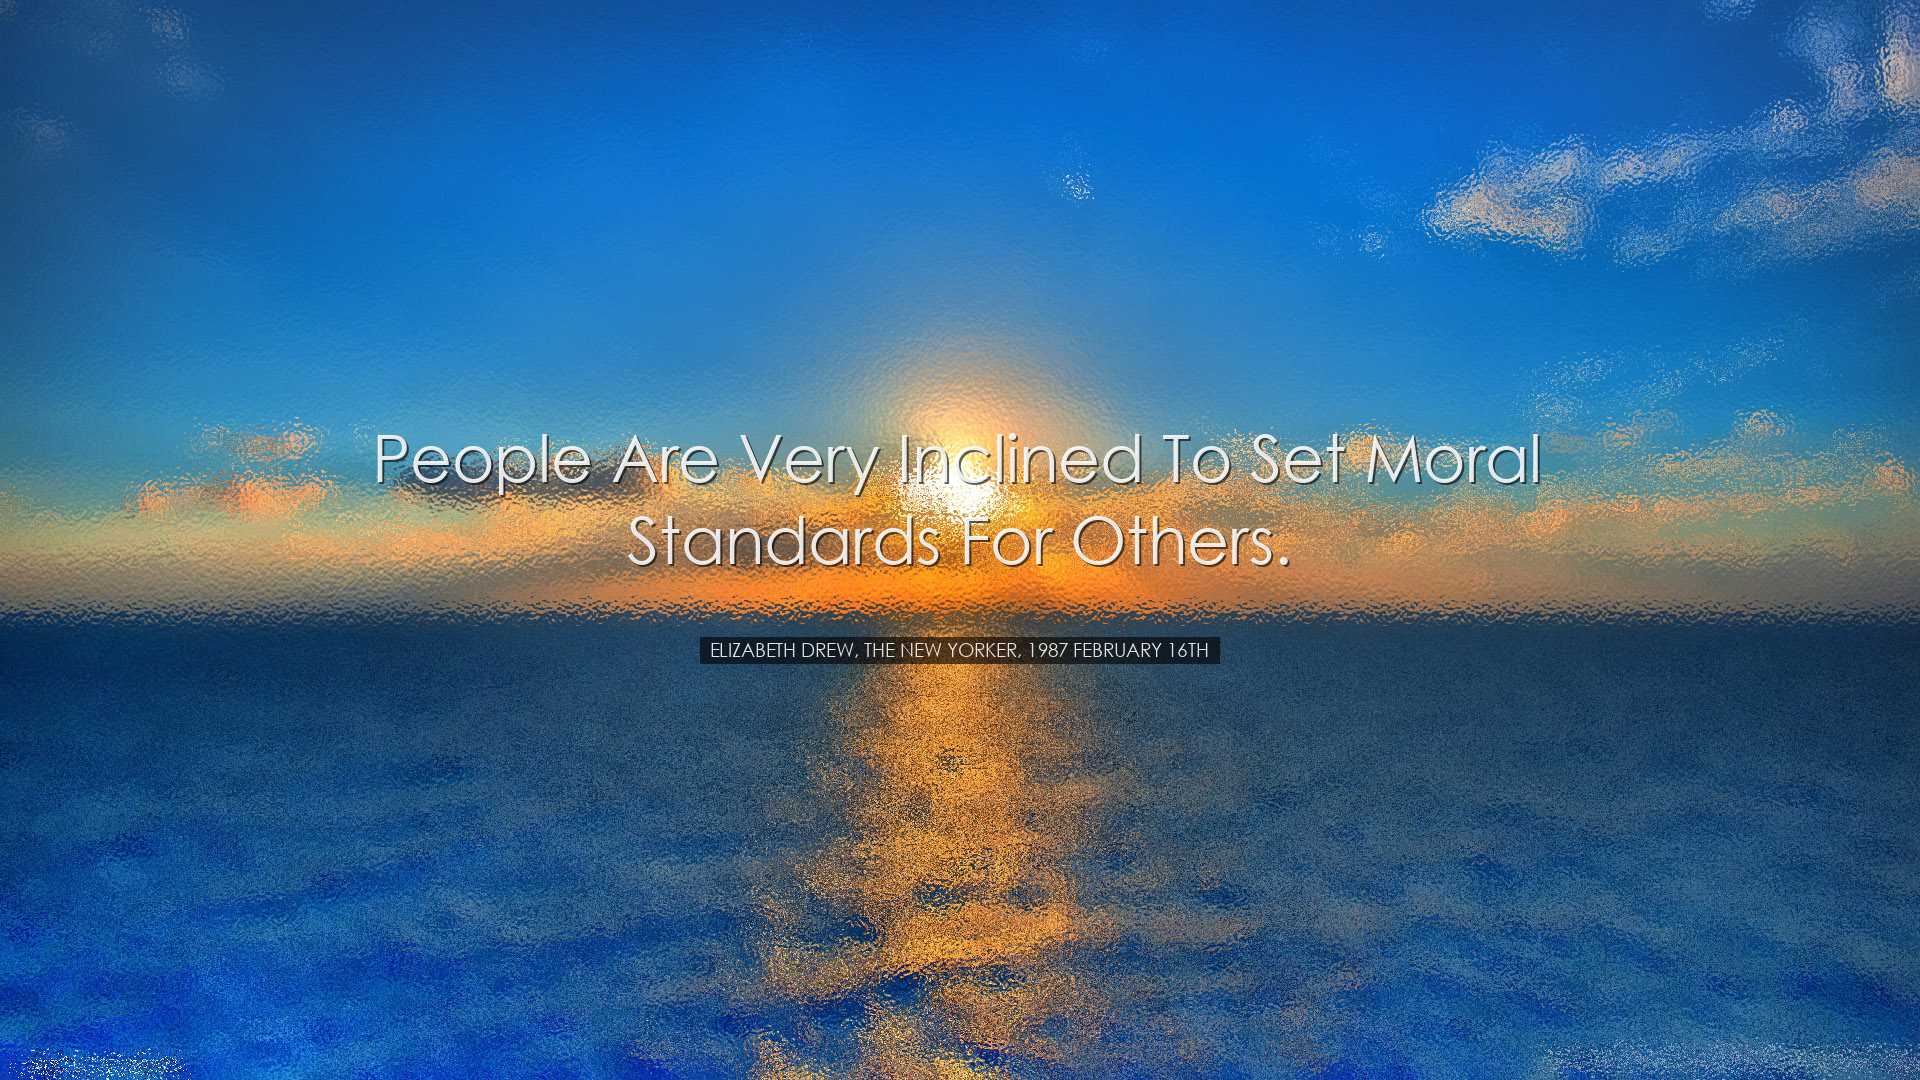 People are very inclined to set moral standards for others. - Eliz